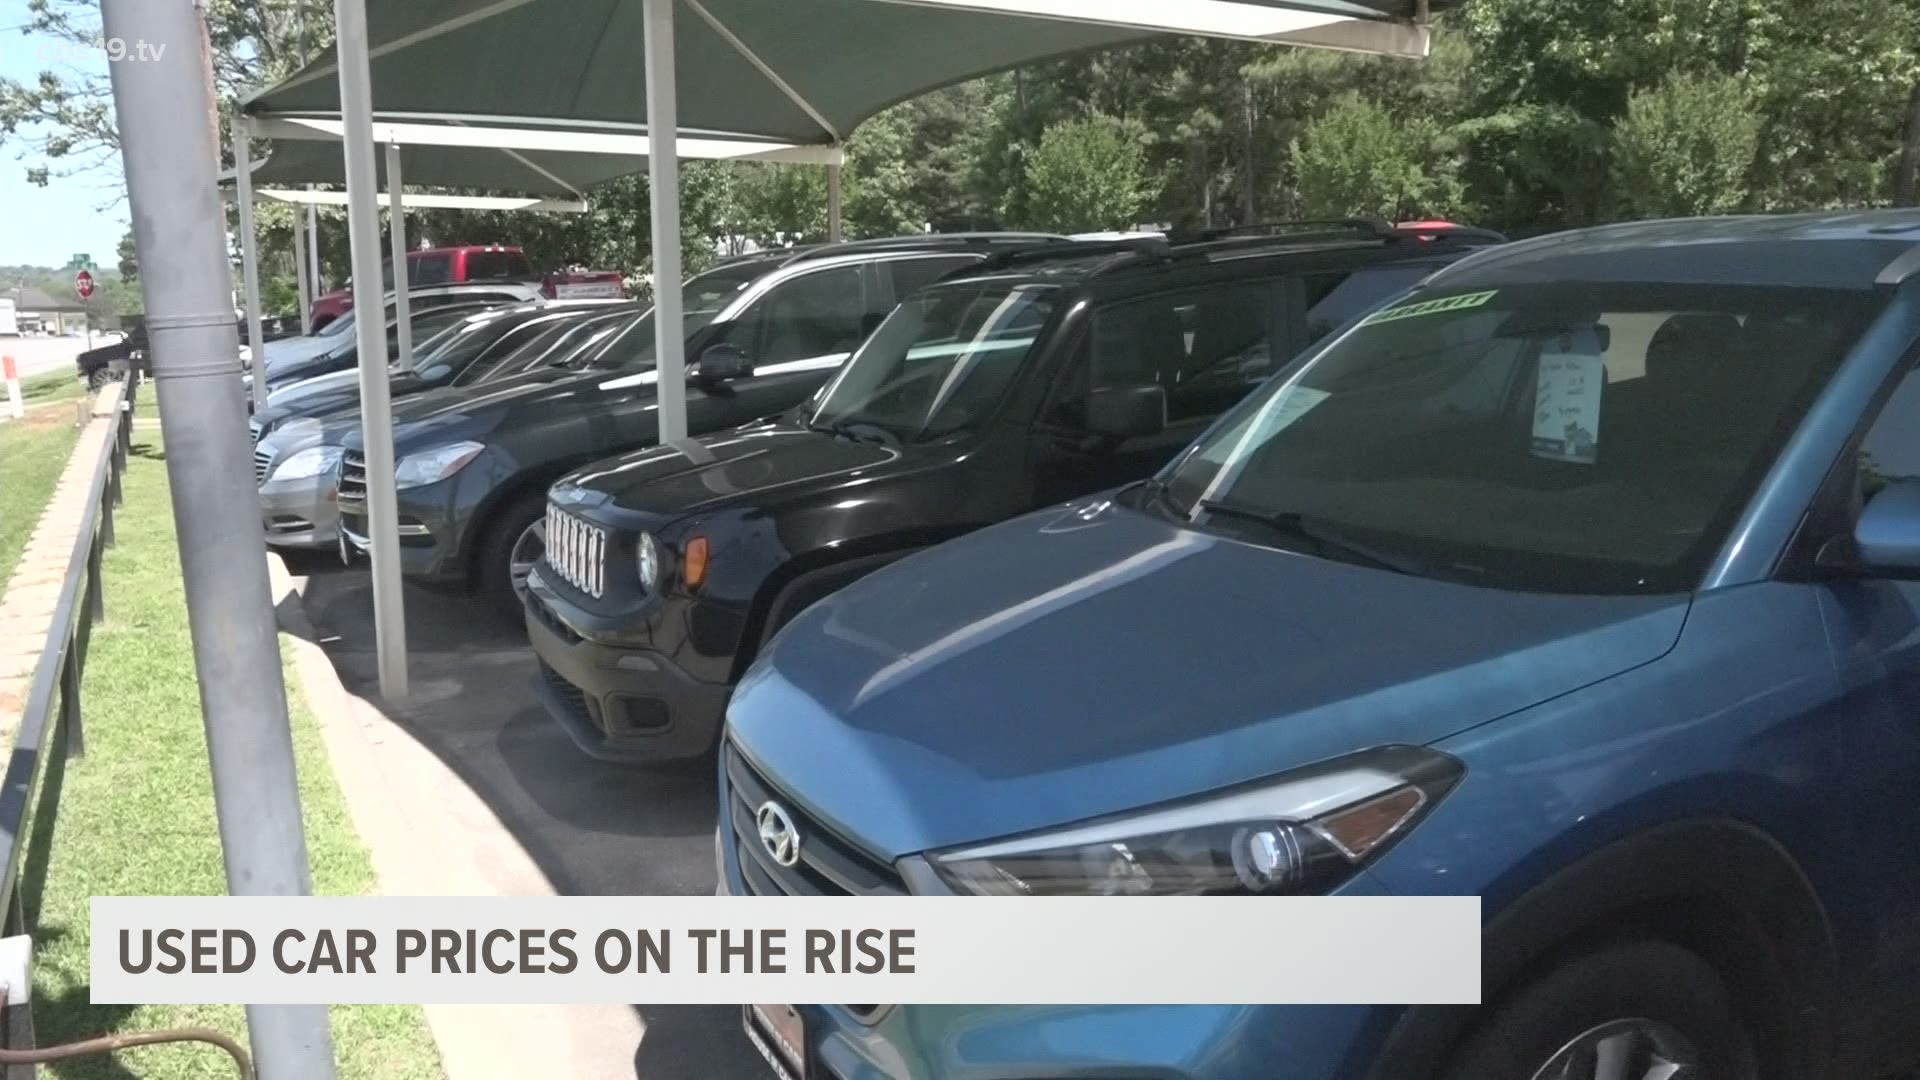 "It started about four or five months ago, really the steady upward climb," a House of Cars Sales Consultant said.